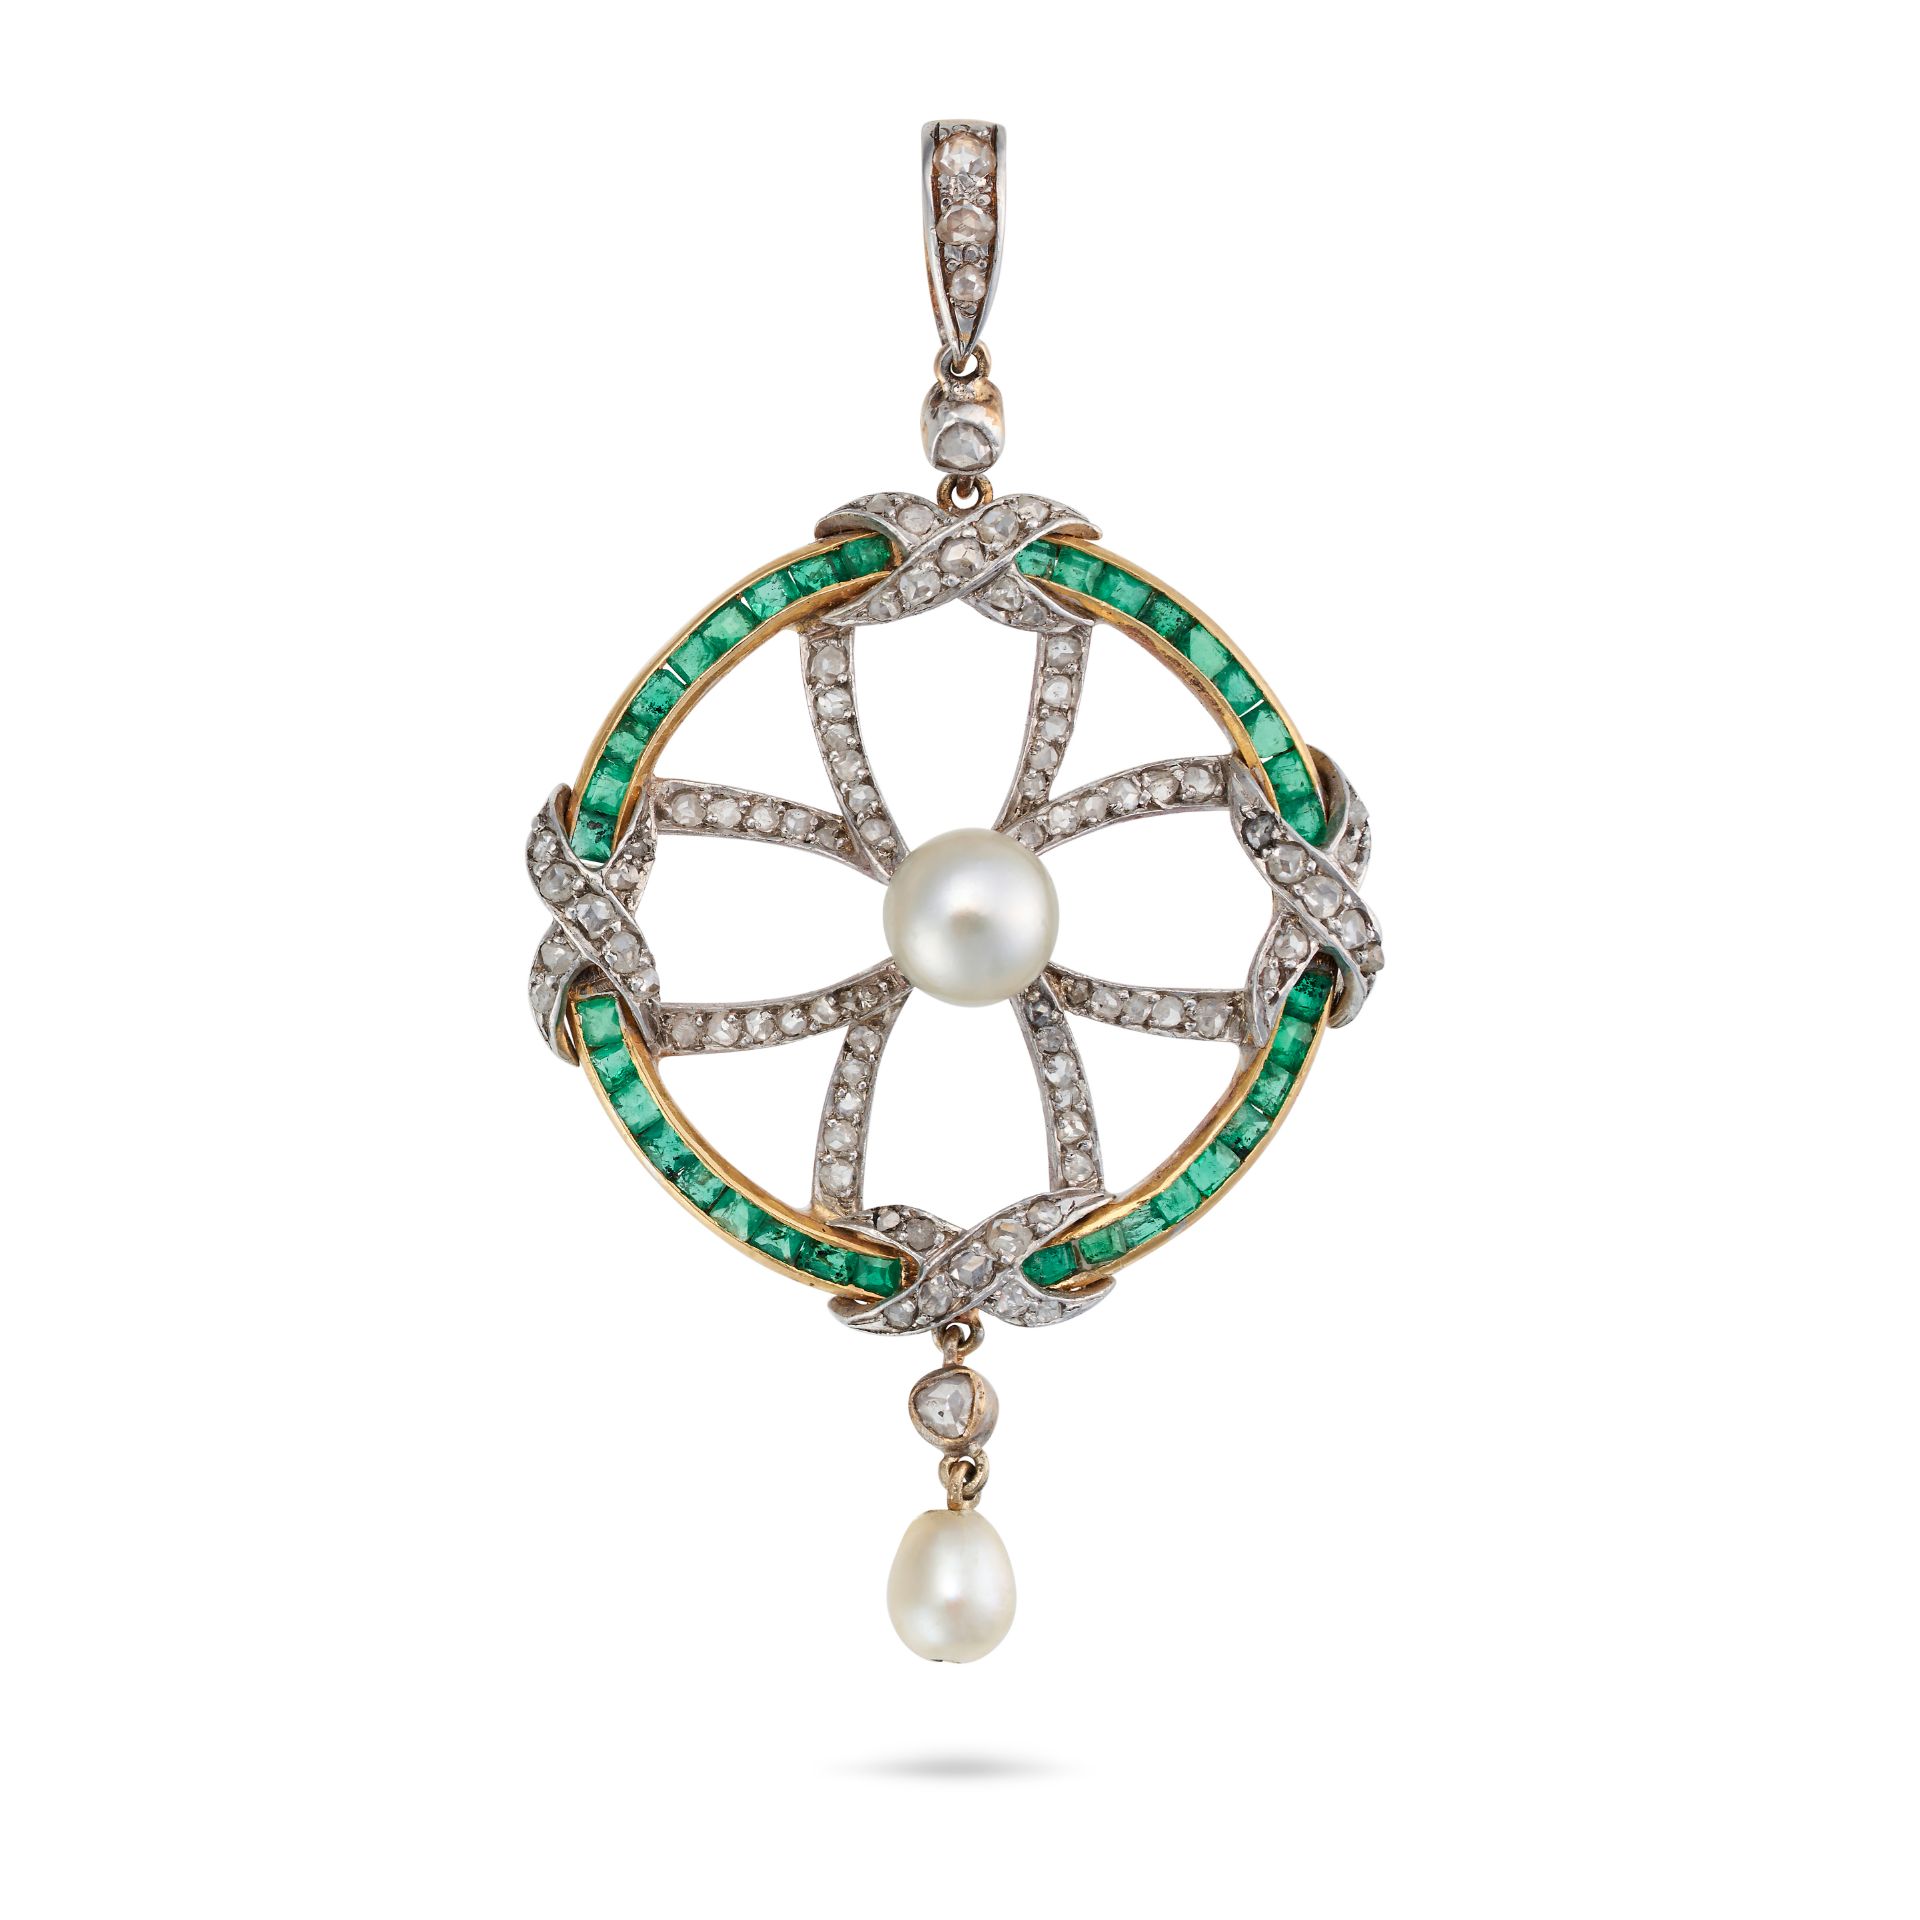 AN ANTIQUE PEARL, EMERALD AND DIAMOND PENDANT the circular pendant set with a pearl accented by r...